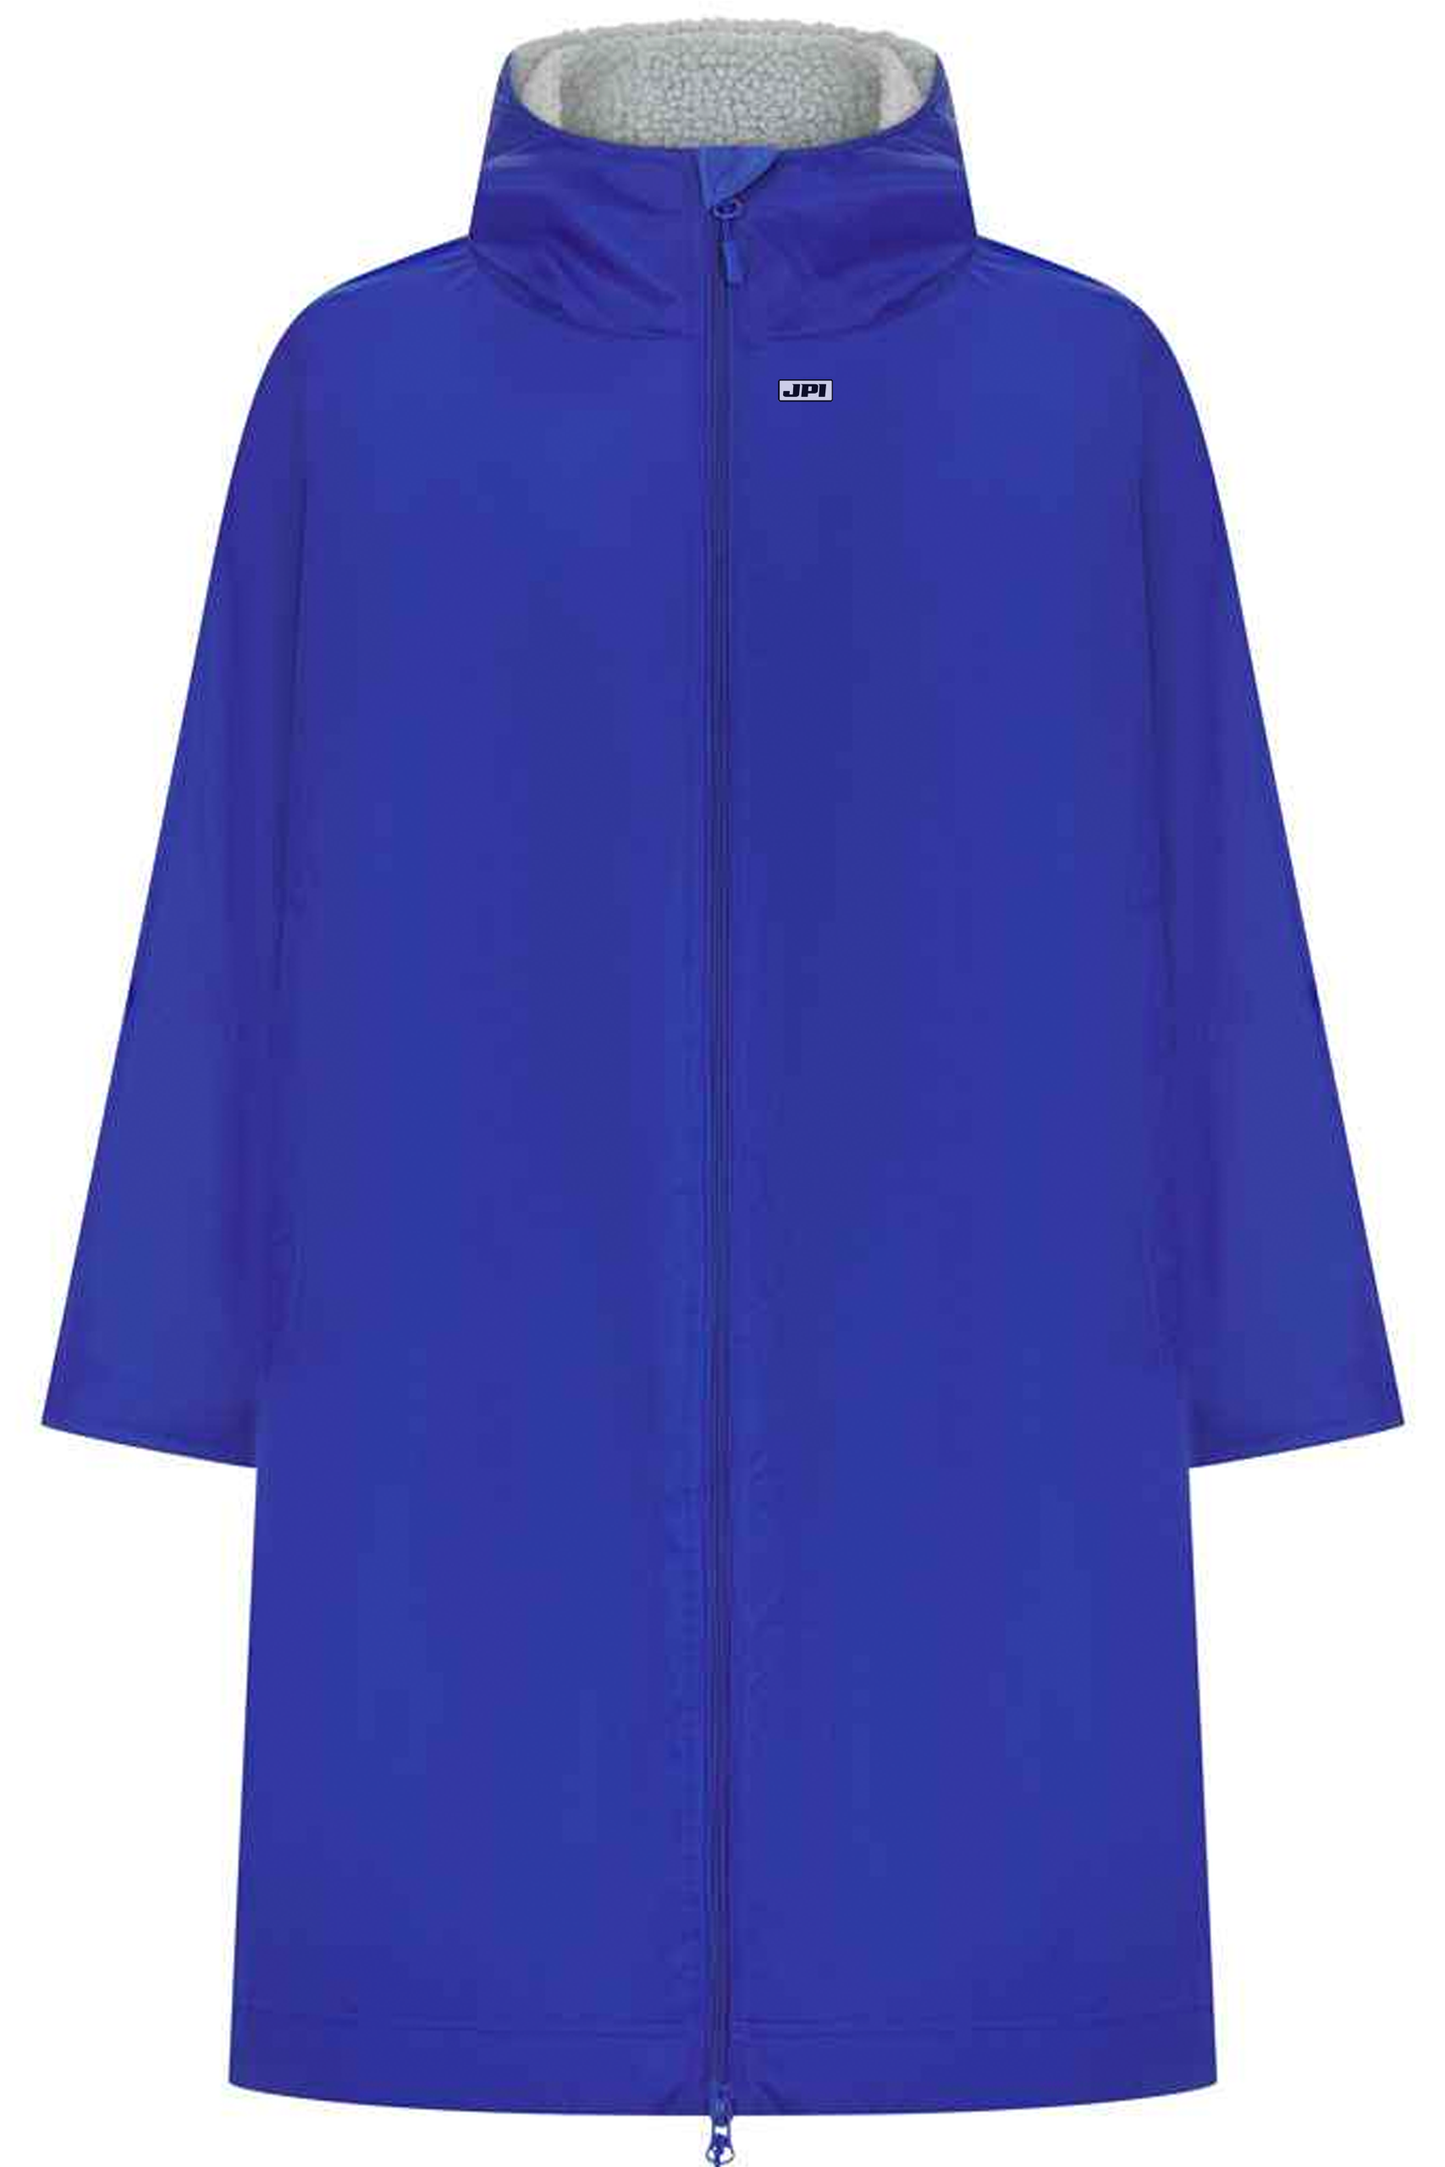 JPI Robe. All weather robe, teddy fleece lining, waterproof and windproof. Picture shows blue robe.